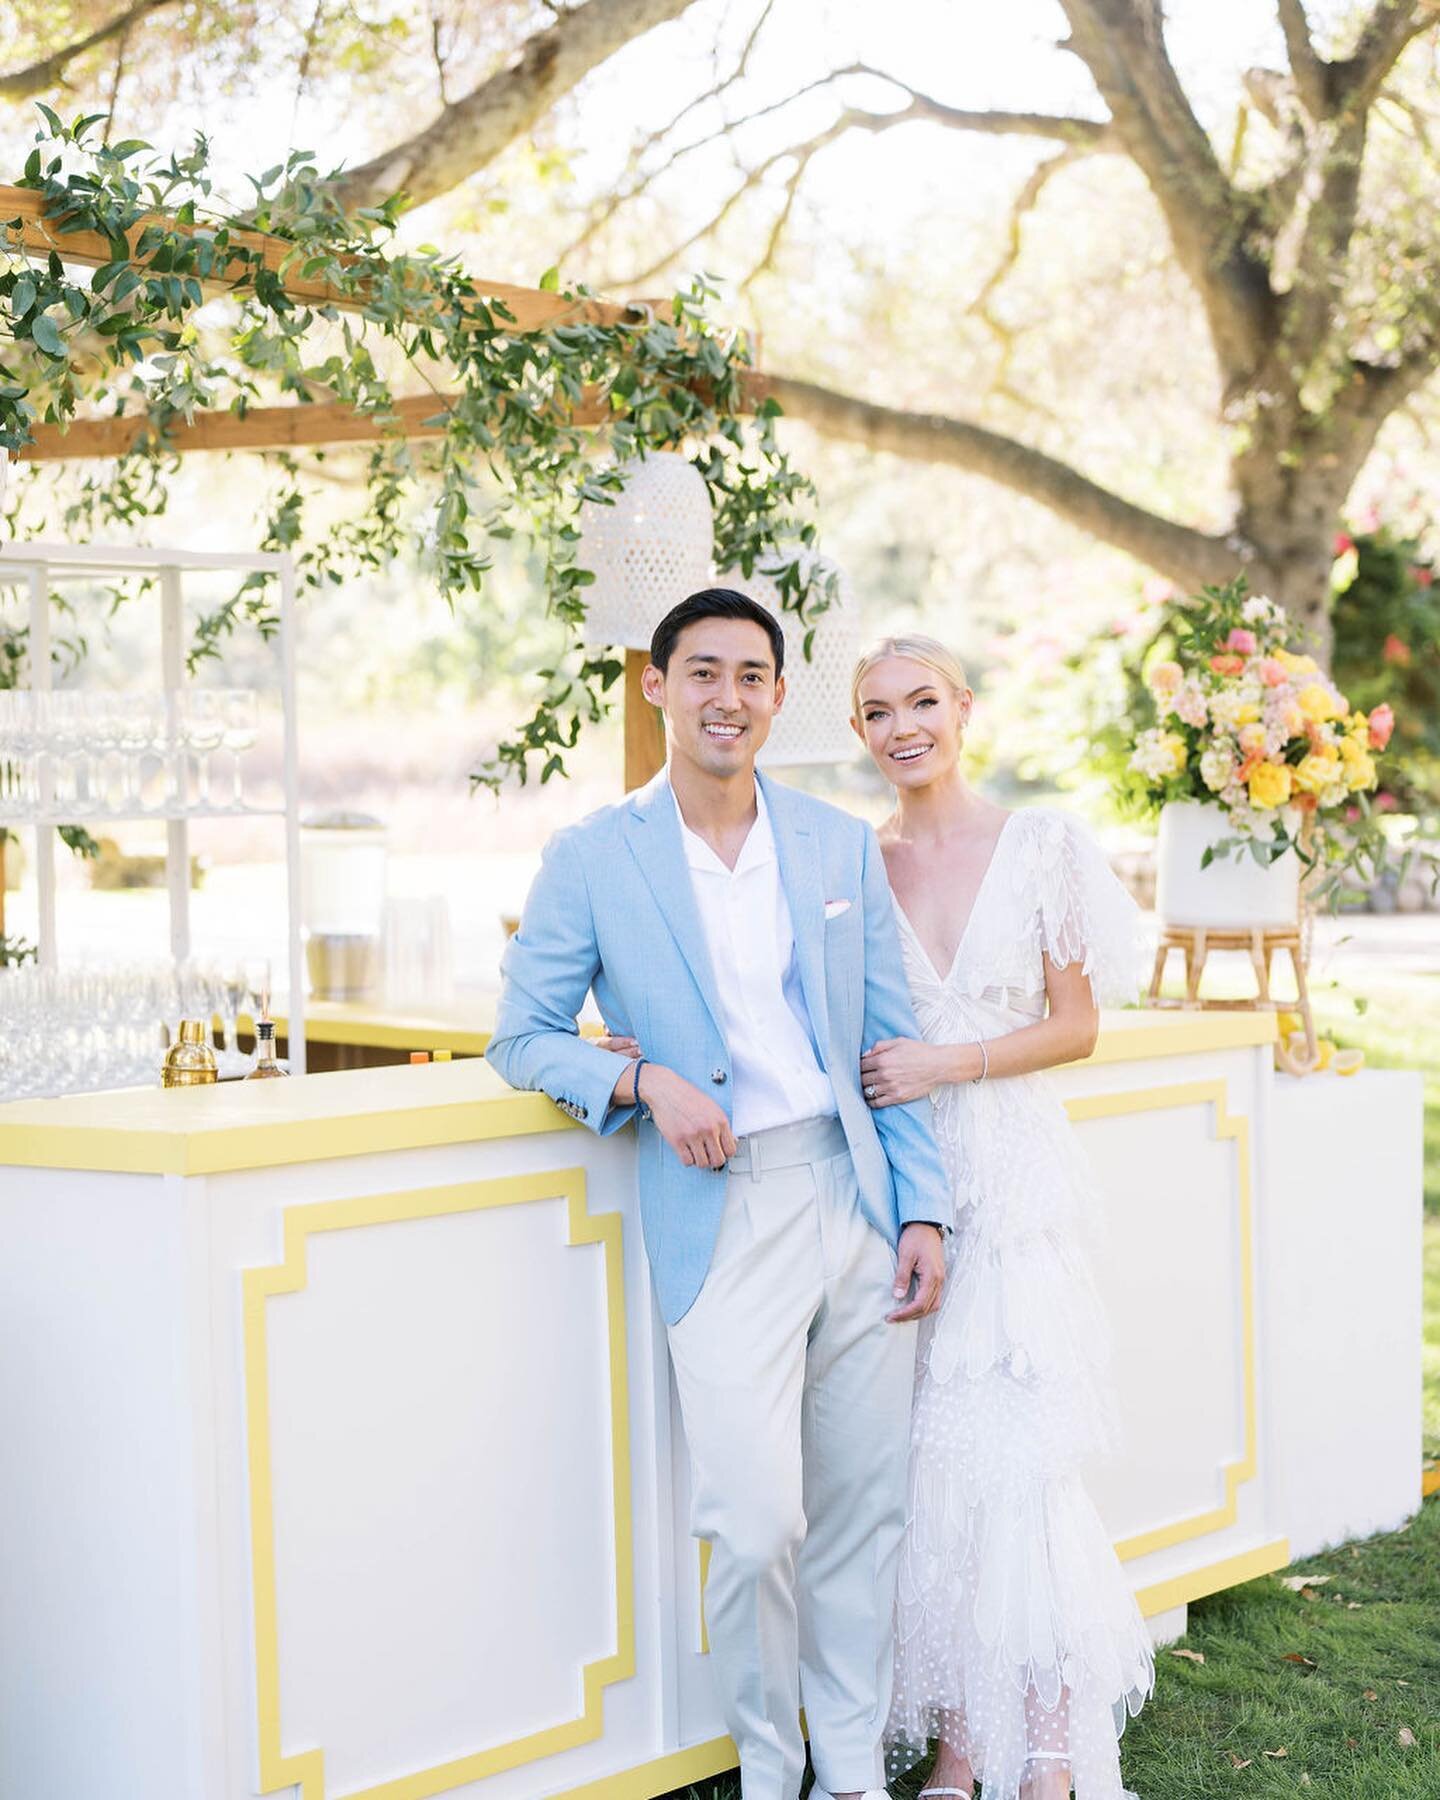 Bars at events are like the kitchen of the house - everyone hangs out there. Make your bars intentional and fun! This engagement party transported their guests to a coastal Italy-inspired garden party, complete with Aperol spritz, of course! 
.
.
.
.